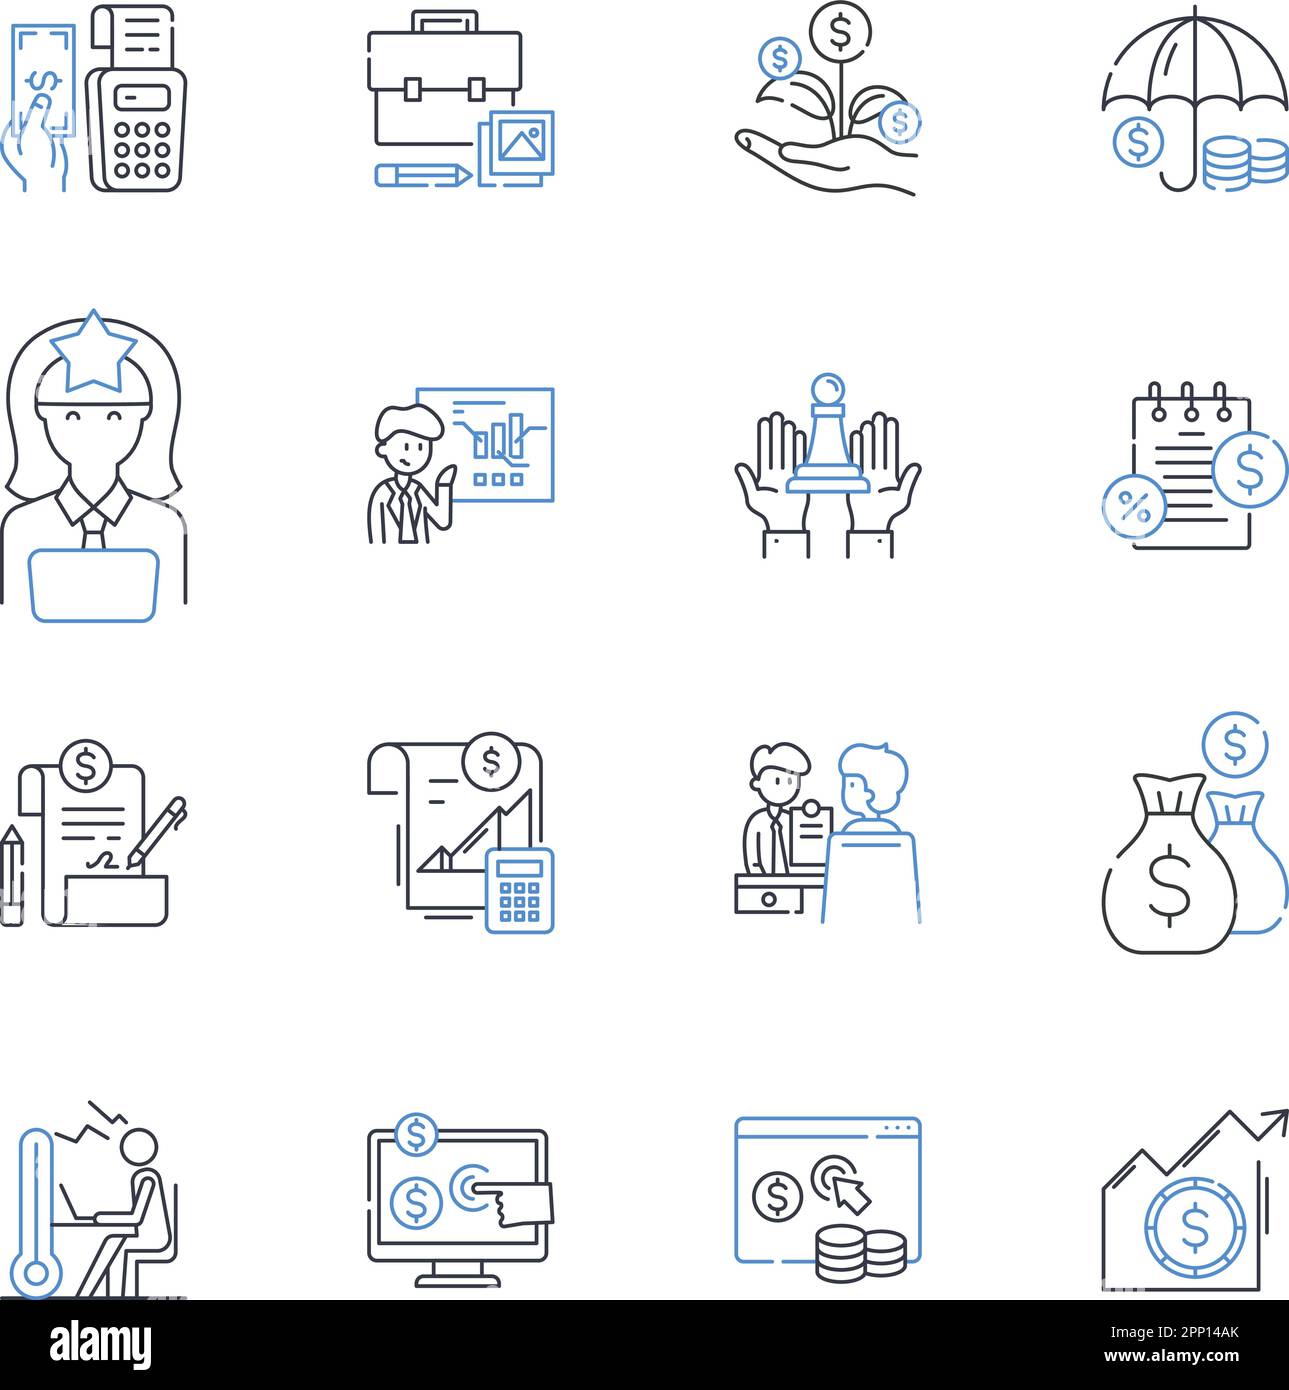 Payroll processing line icons collection. Wages, Overtime, Deductions, Taxes, Benefits, Salary, Gross Pay vector and linear illustration. Net Pay Stock Vector